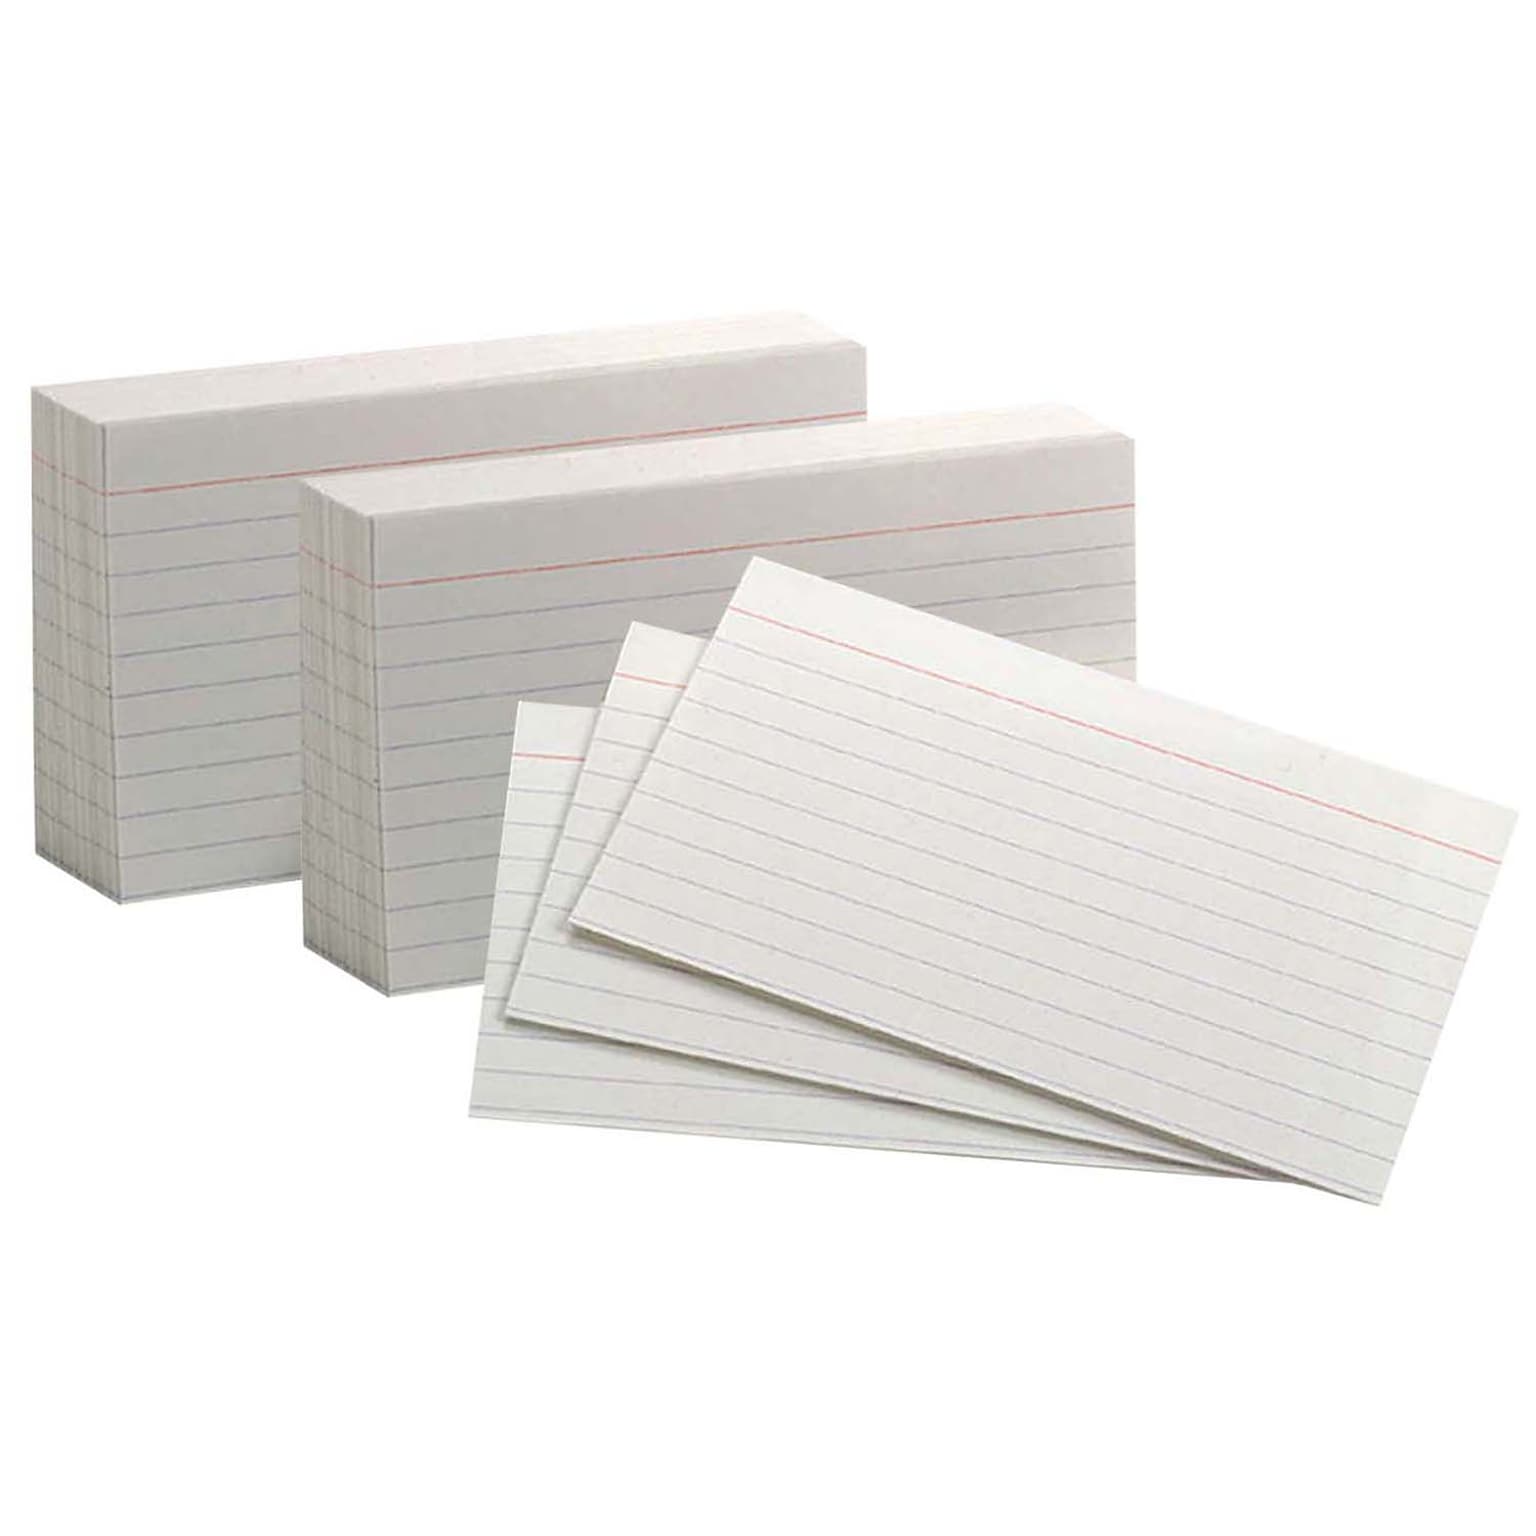 Oxford 3 x 5 Commercial Index Cards, Ruled, White, 1000/Pack, 2 Packs/Bundle (ESS00031-2)